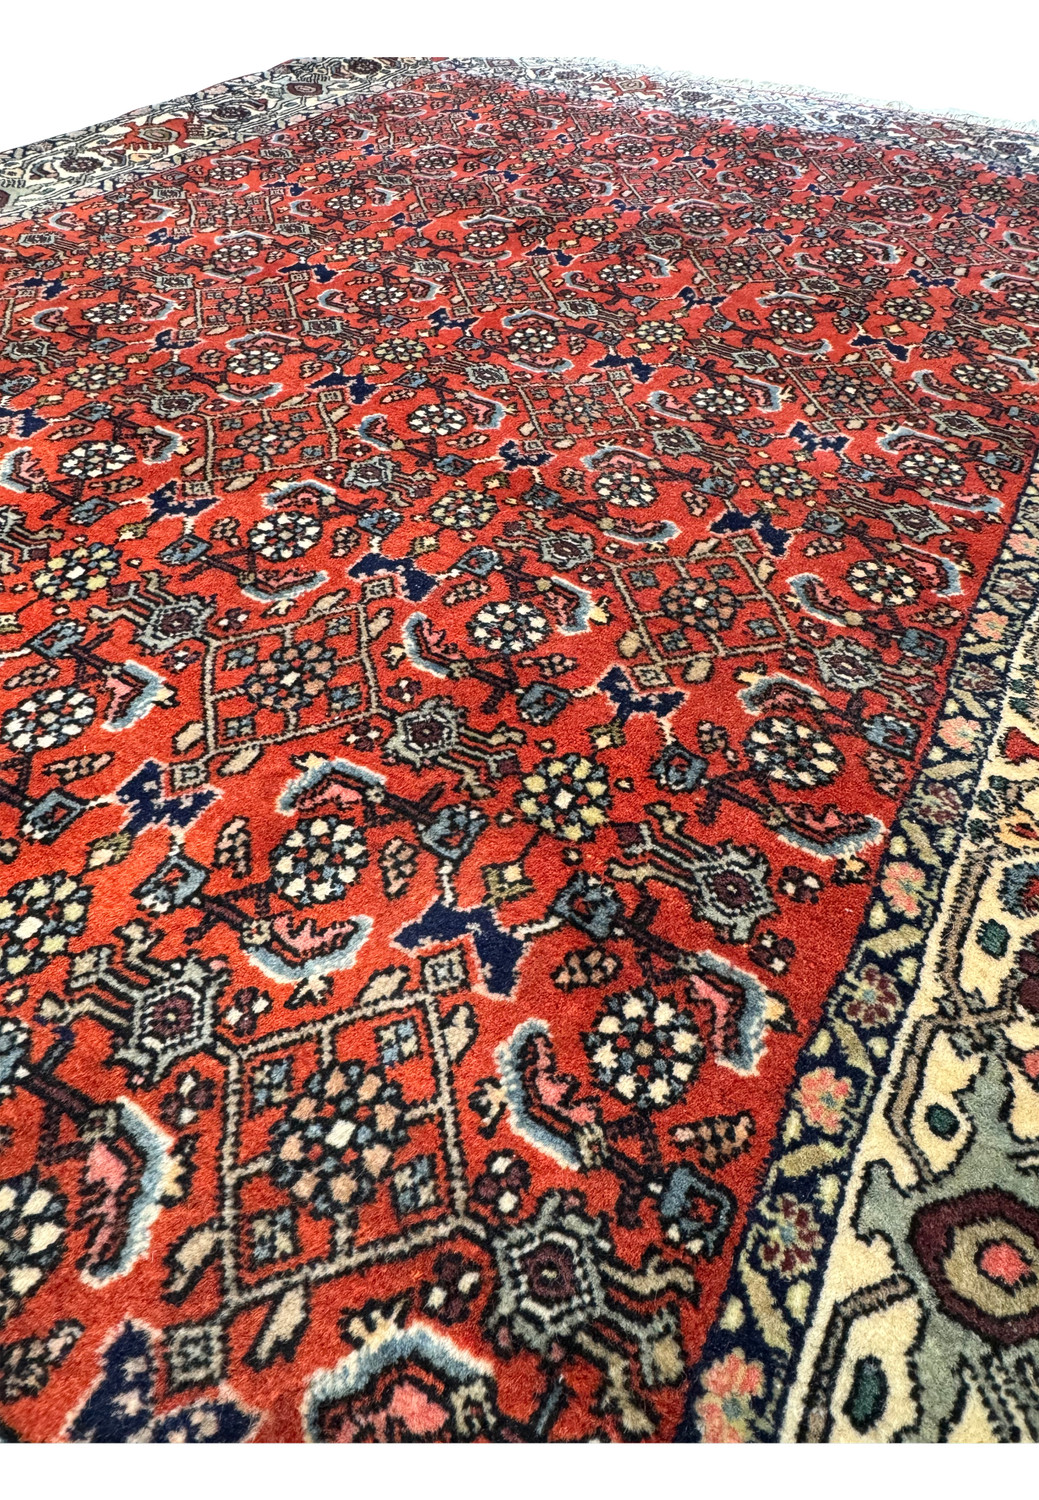 A side angle of the Persian Bijar rug, emphasizing the depth of the pile and the vibrancy of the red hue.